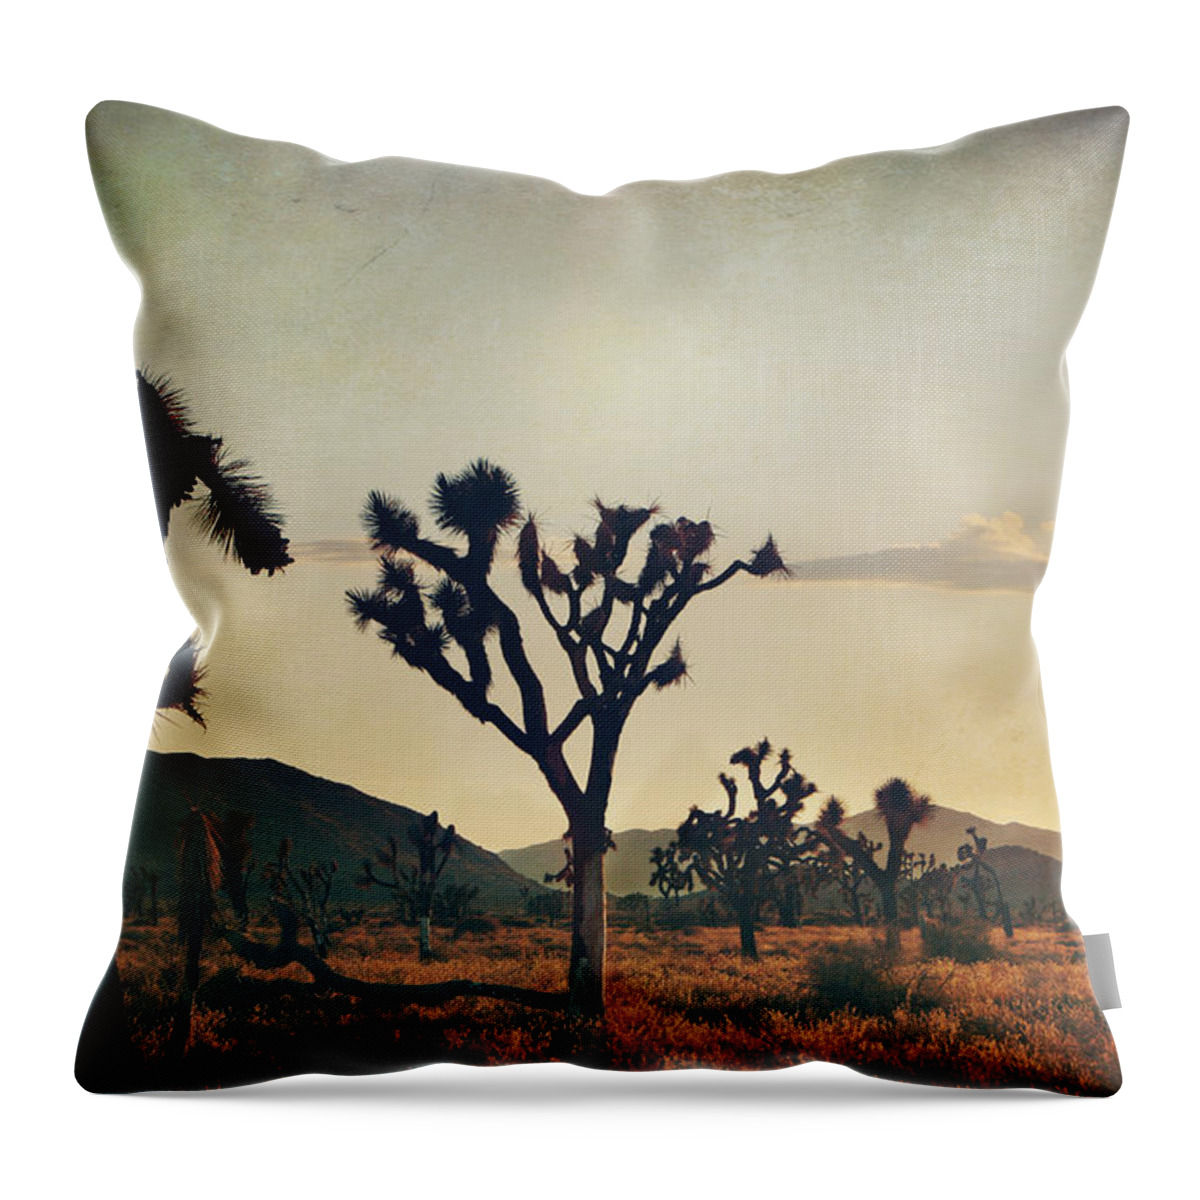 Joshua Tree National Park Throw Pillow featuring the photograph In Your Arms as the Sun Goes Down by Laurie Search